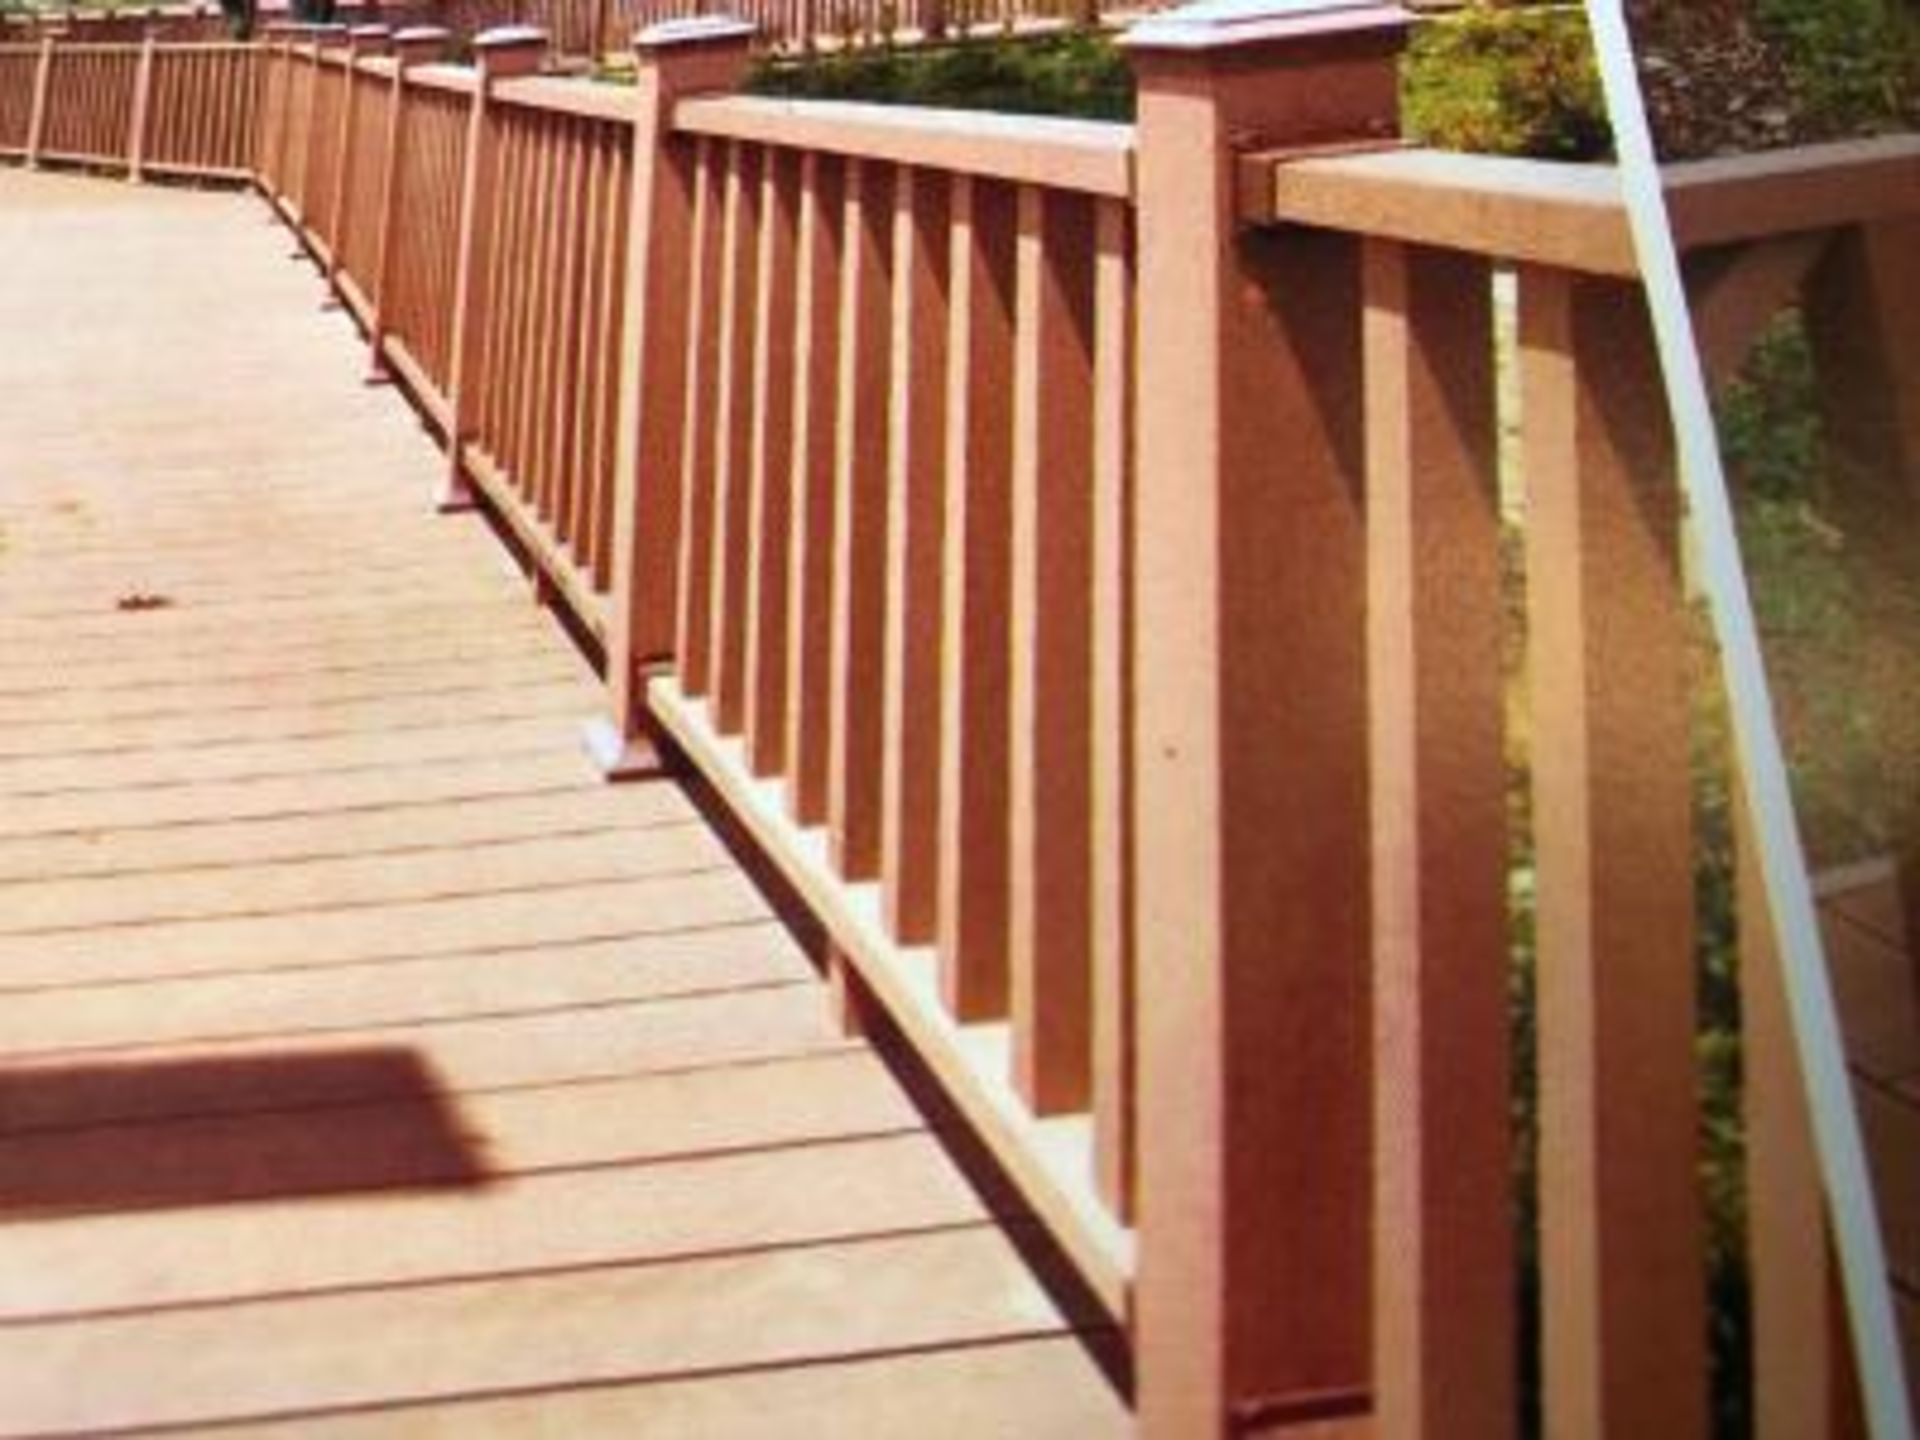 * Coffee Brown Balustrade & Railing Kit approx (10ft x 3.8ft high) 3m long x 1.14m High includes all - Image 4 of 4